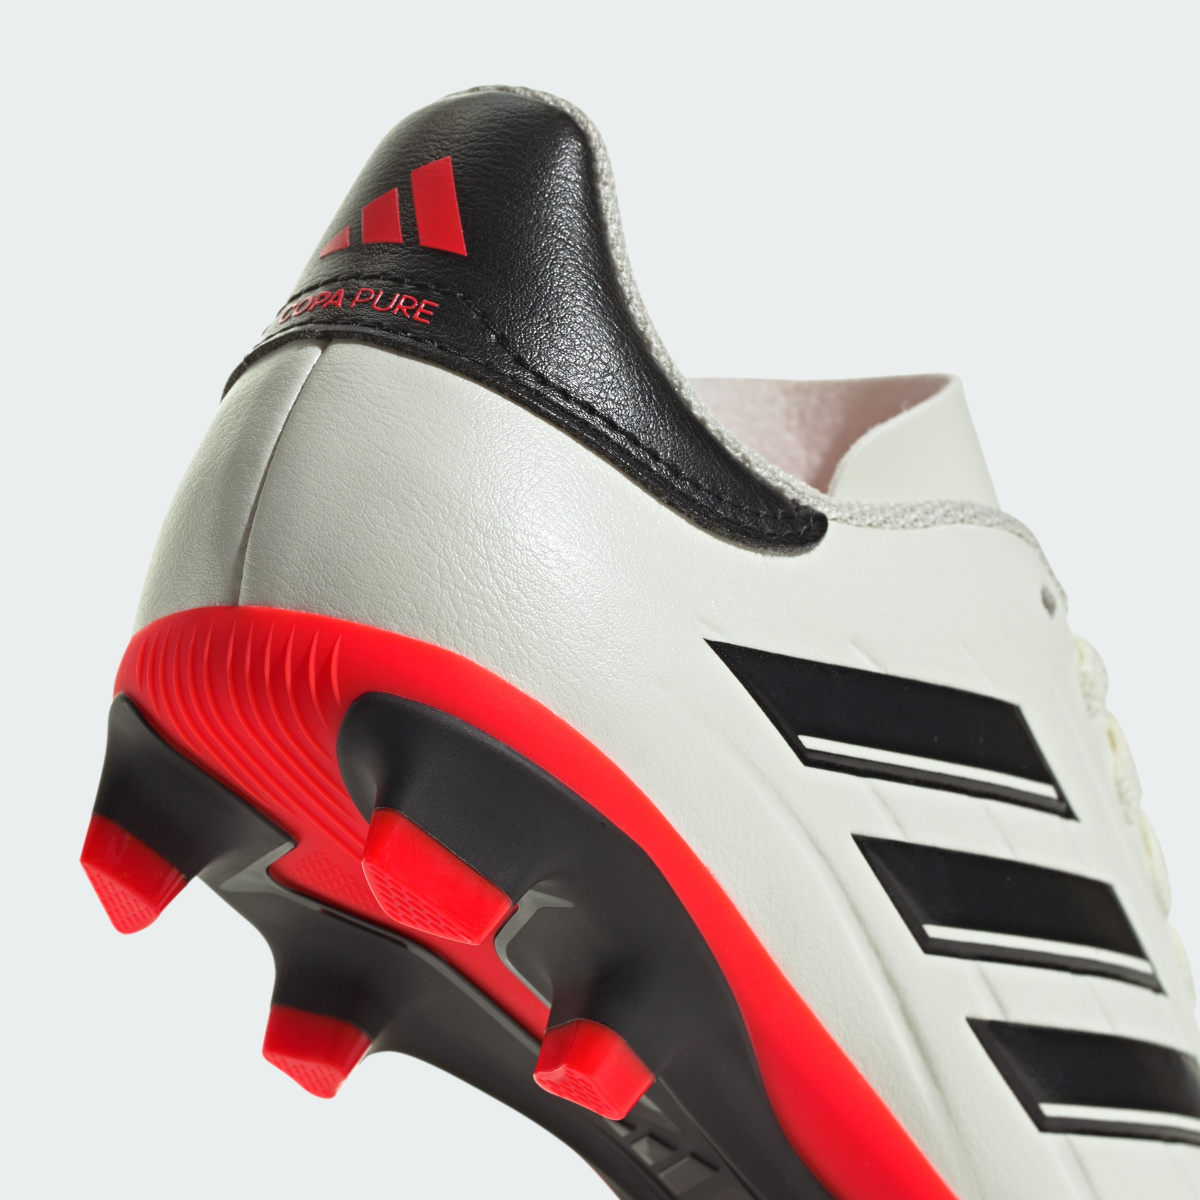 Adidas Chaussure Copa Pure II Club Multi-surfaces. 10